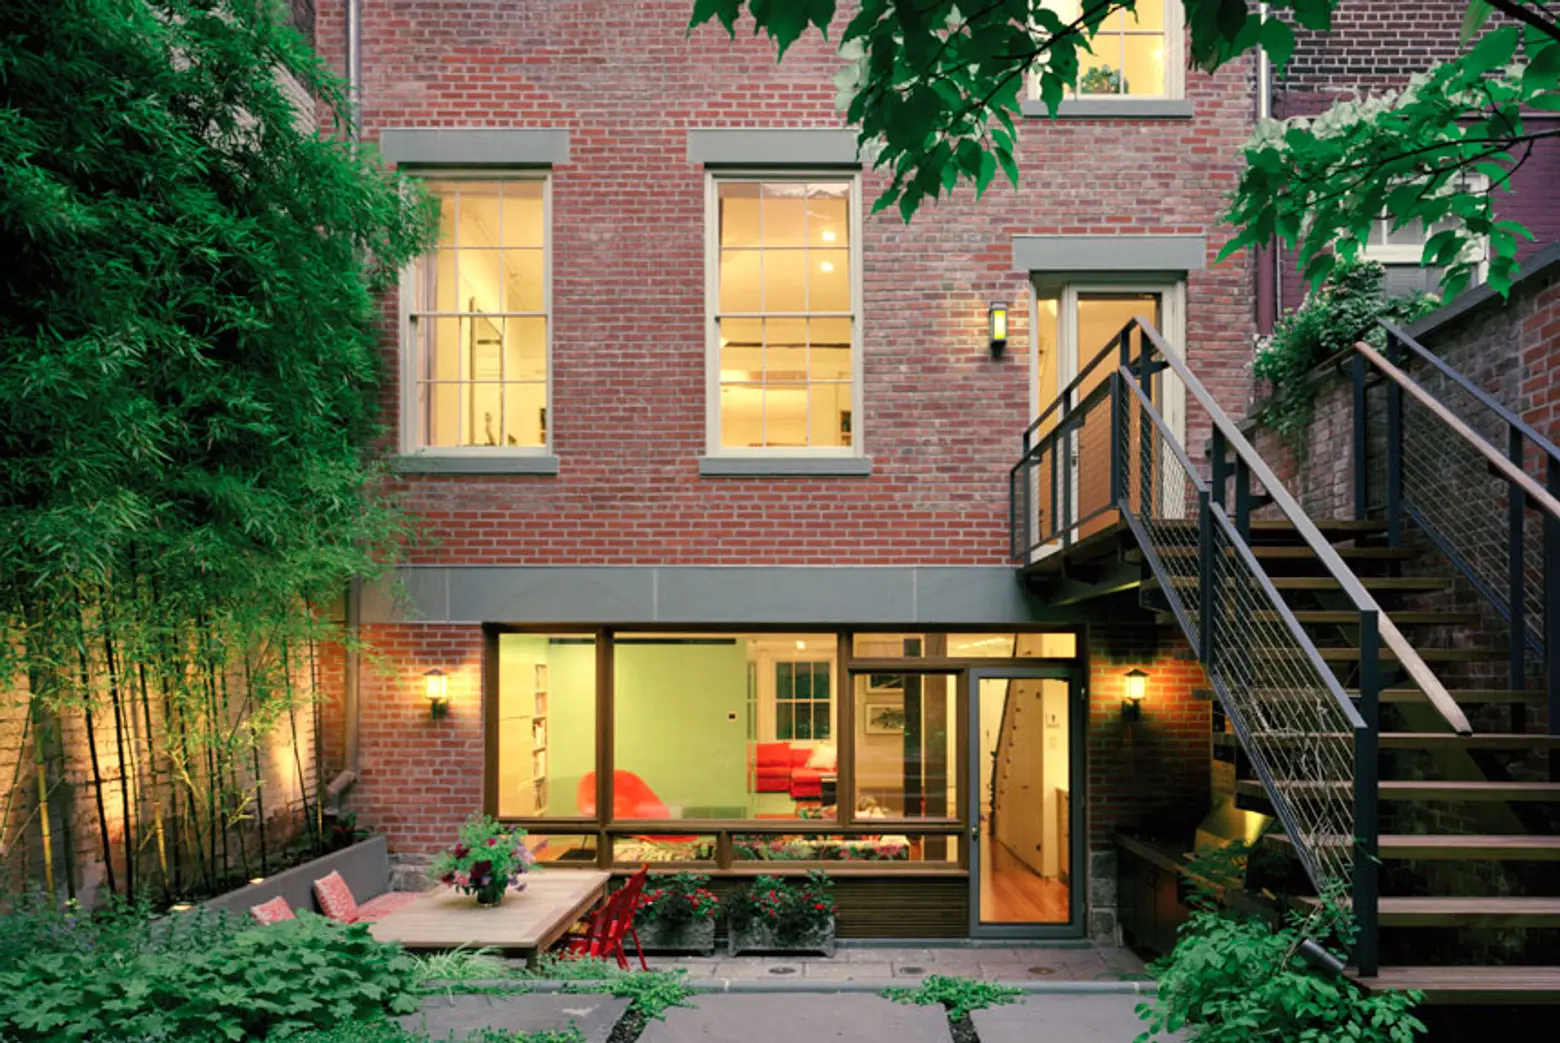 Andrew Franz’s Signature Style Makes a Mark with This Elegant Townhouse in the East Village